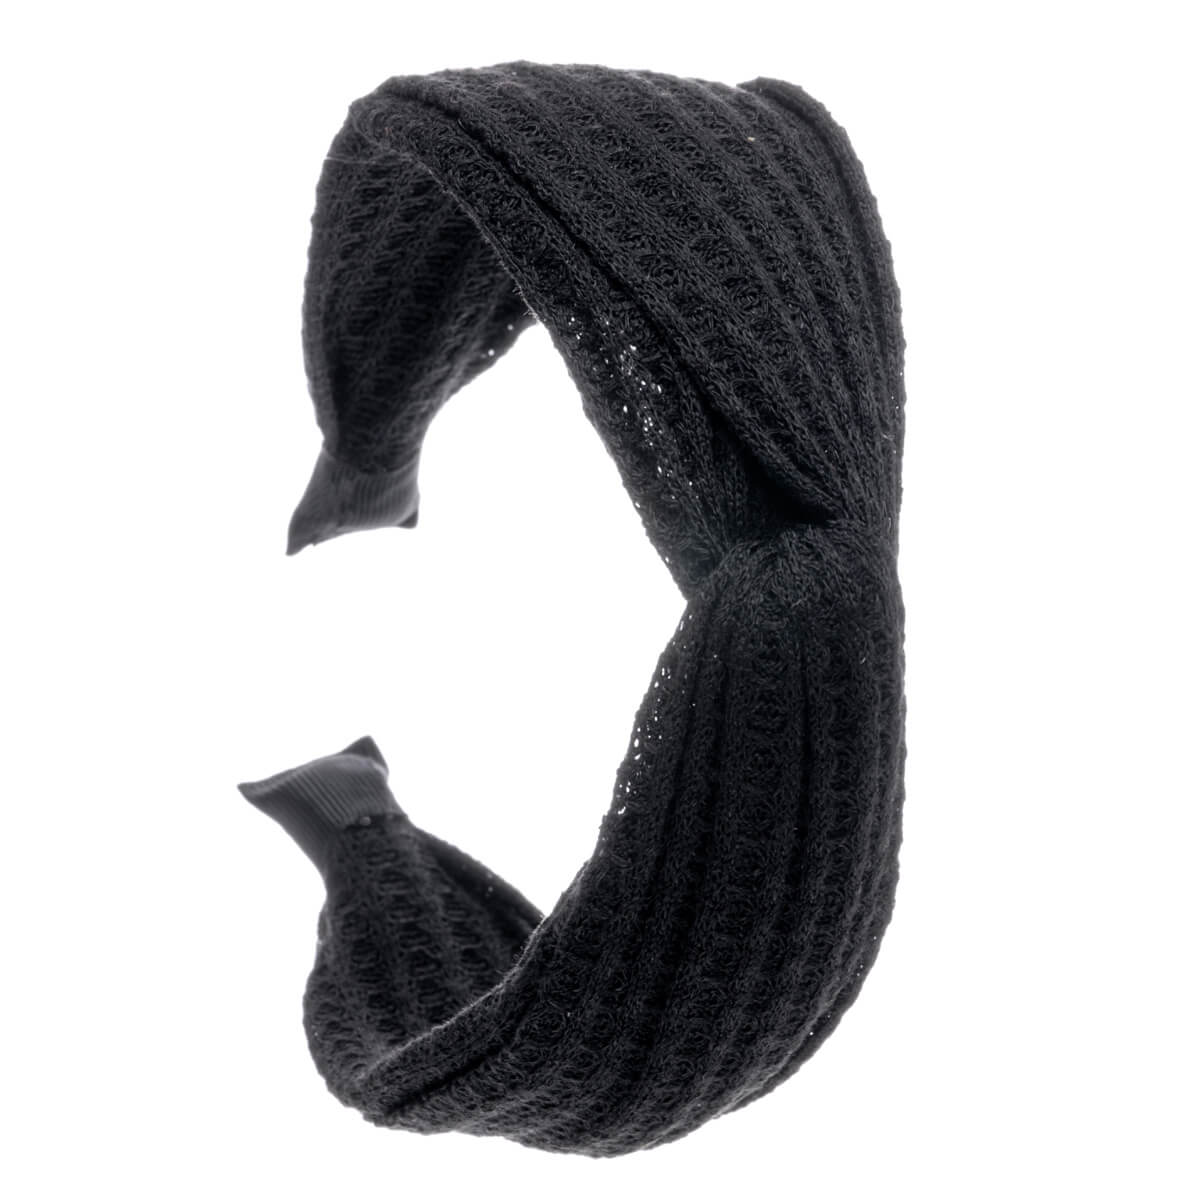 Wide monochrome hairband with knot 6cm